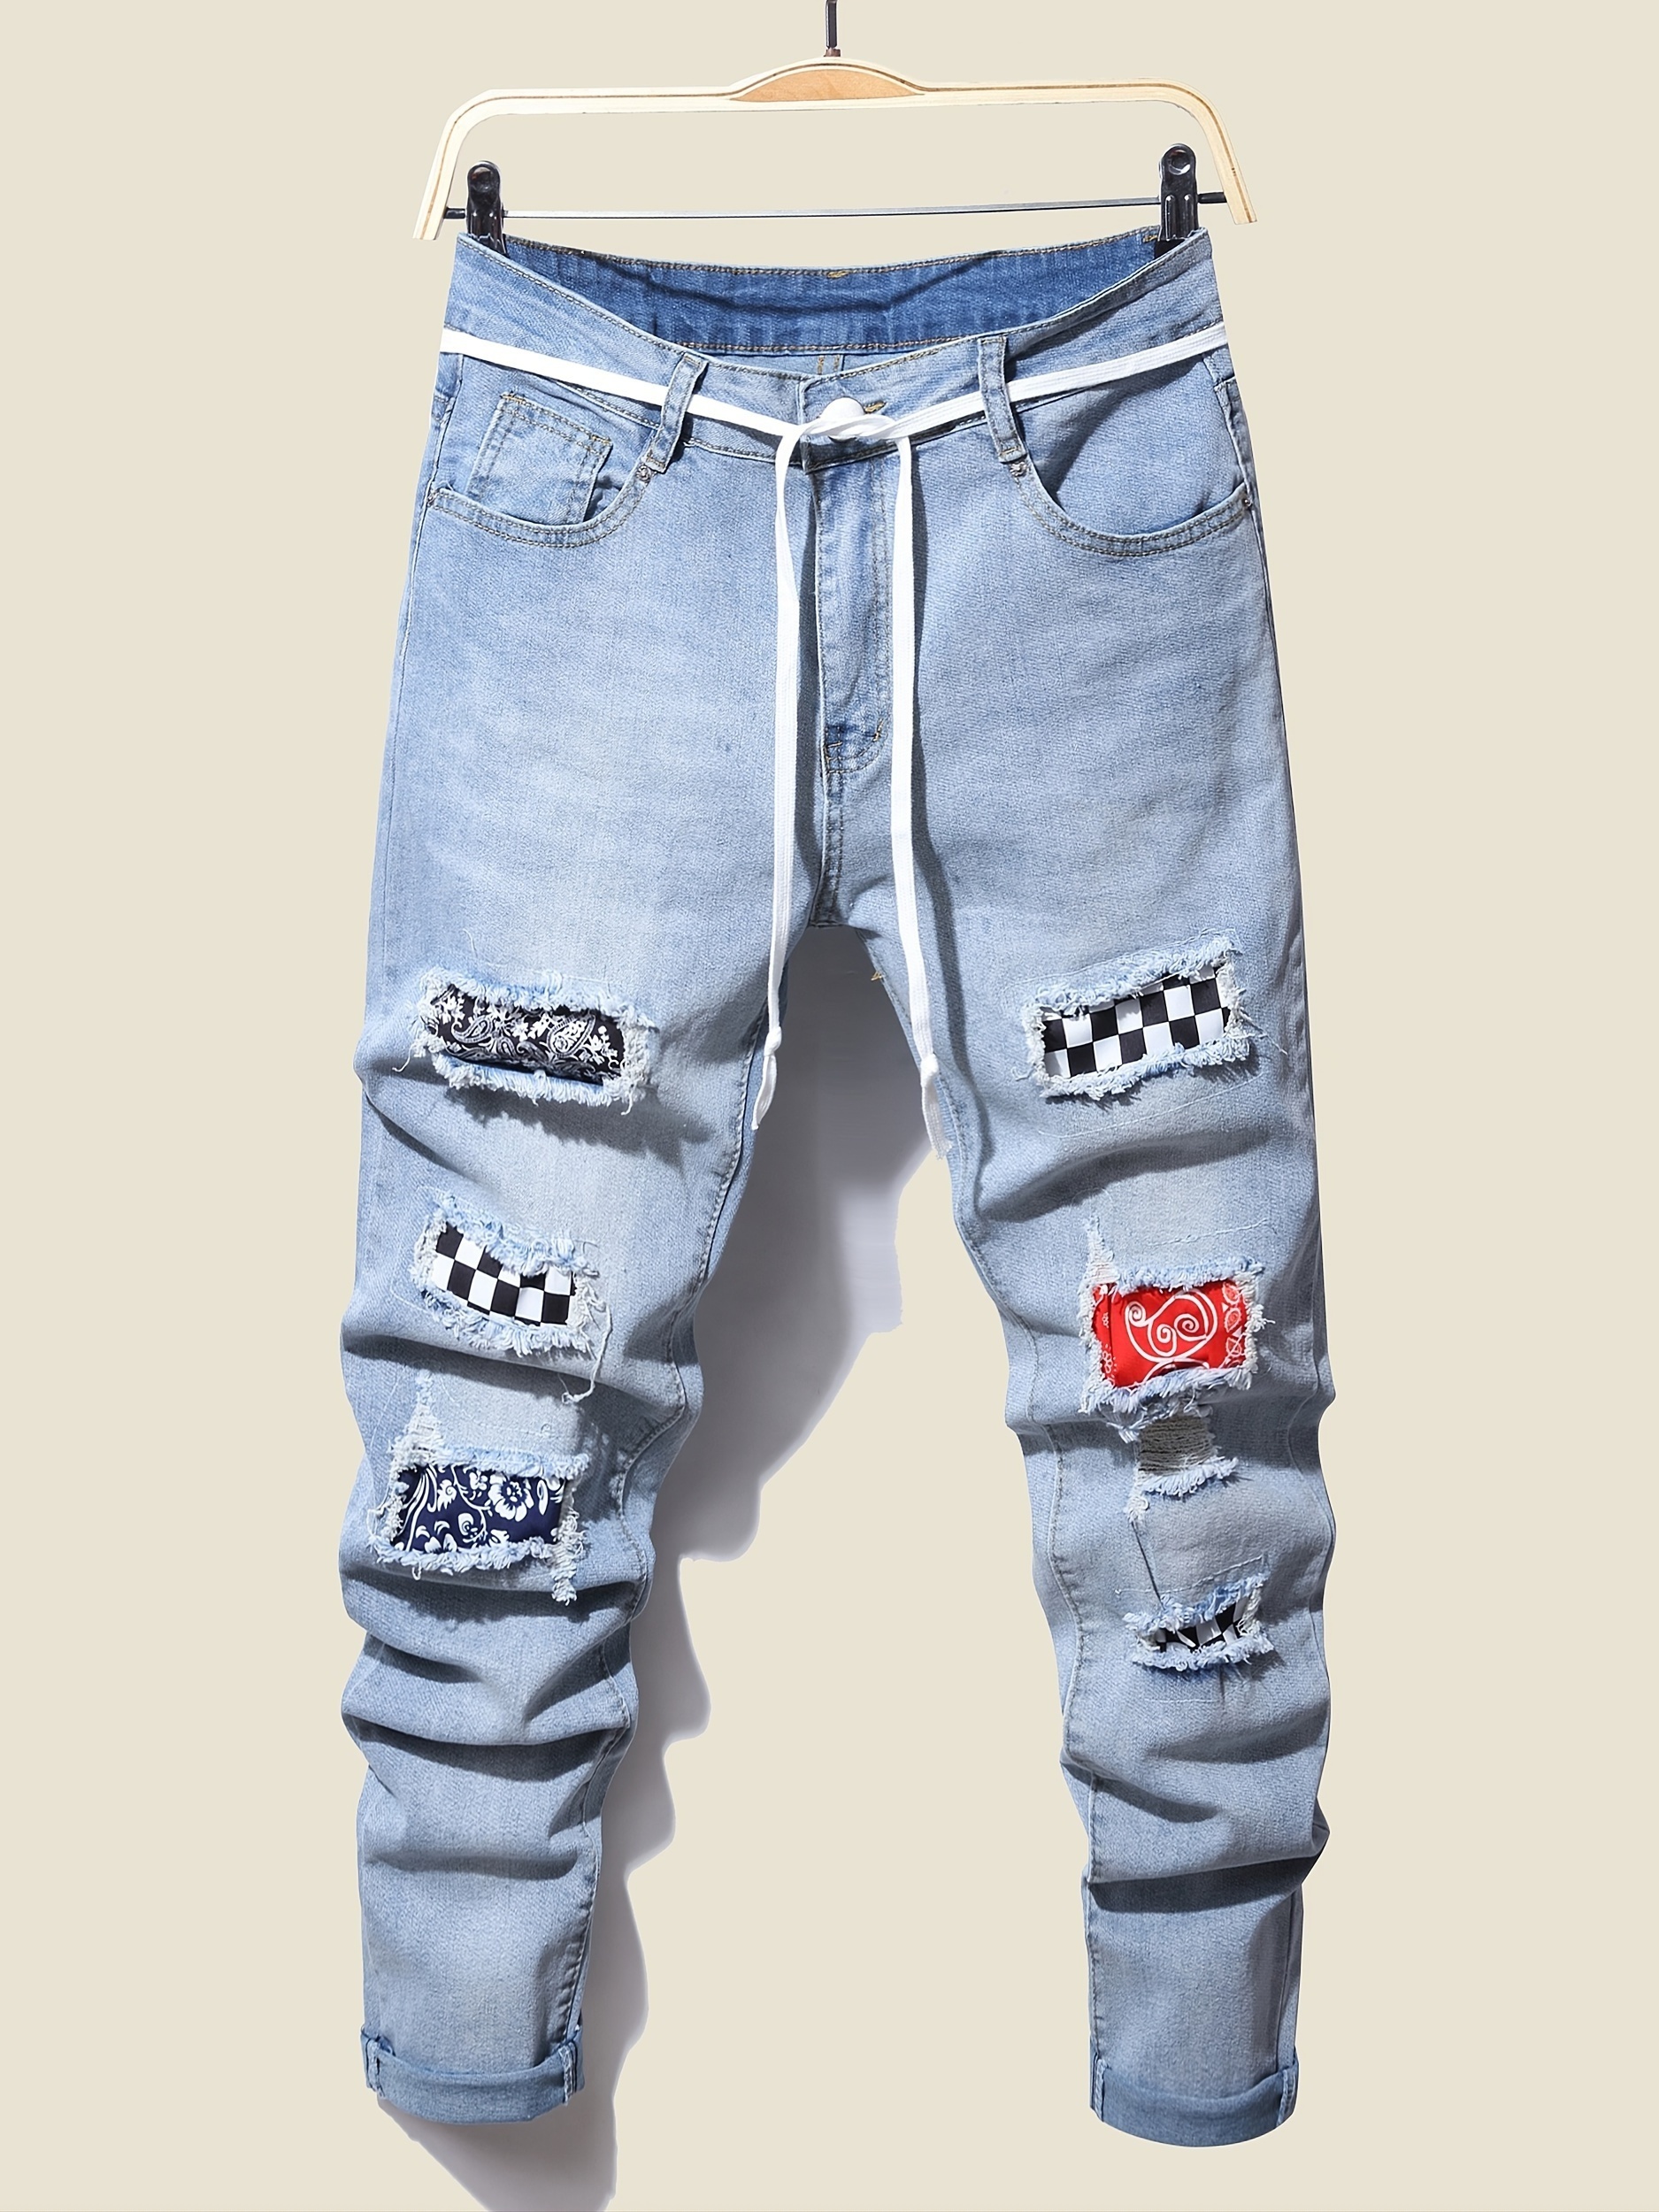 Creative Straight Leg Ripped Jeans Men's Casual Street Style